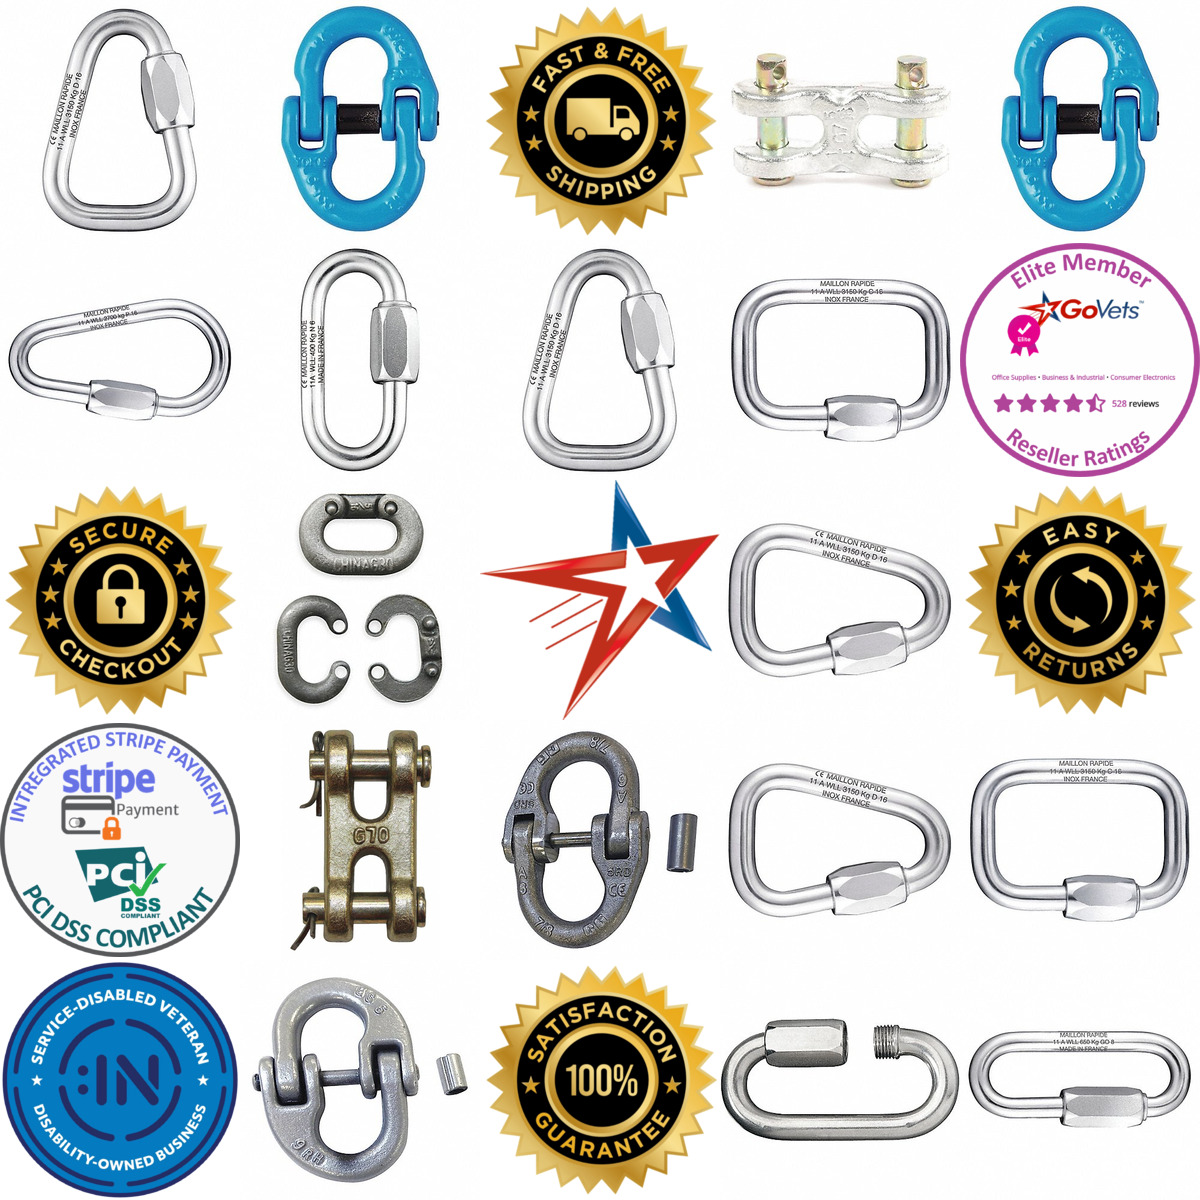 A selection of Connecting Links products on GoVets